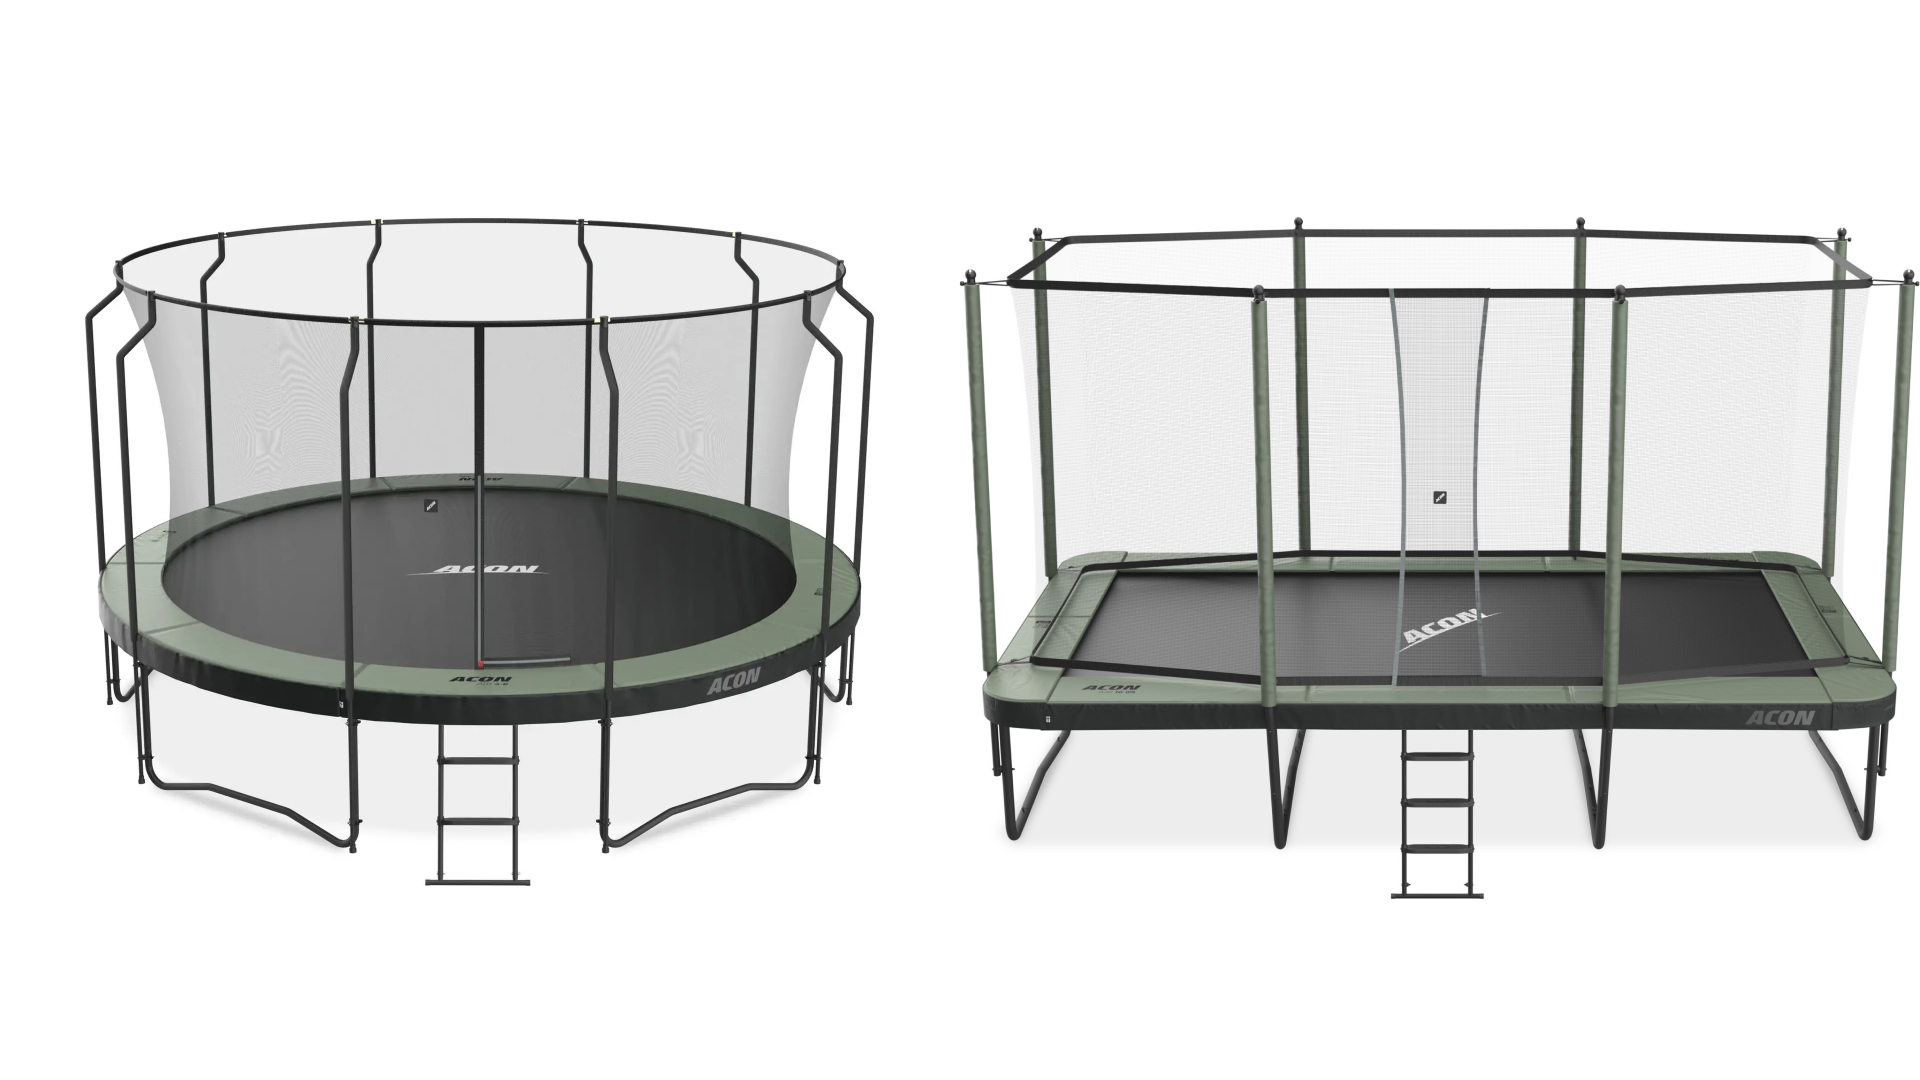 Two big trampolines by acon on a white background